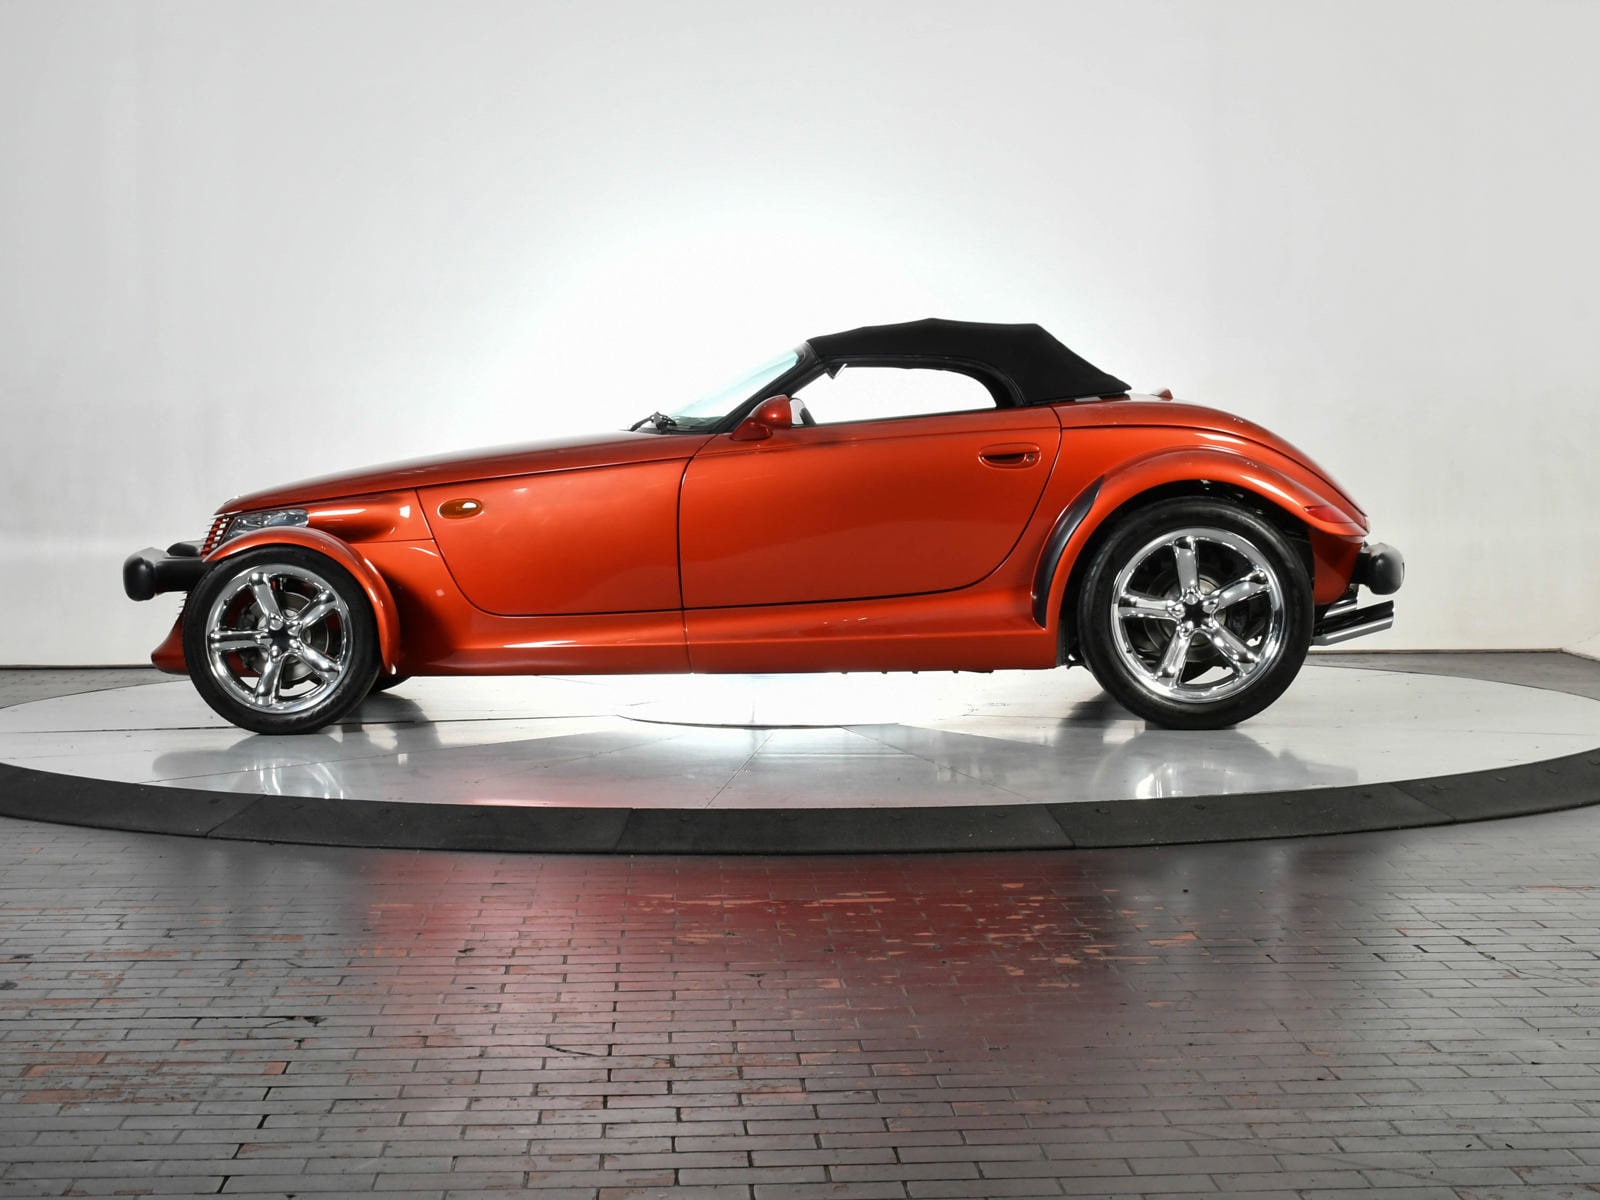 Used 2001 Plymouth Prowler  with VIN 1P3EW65G31V701598 for sale in Dallas, TX